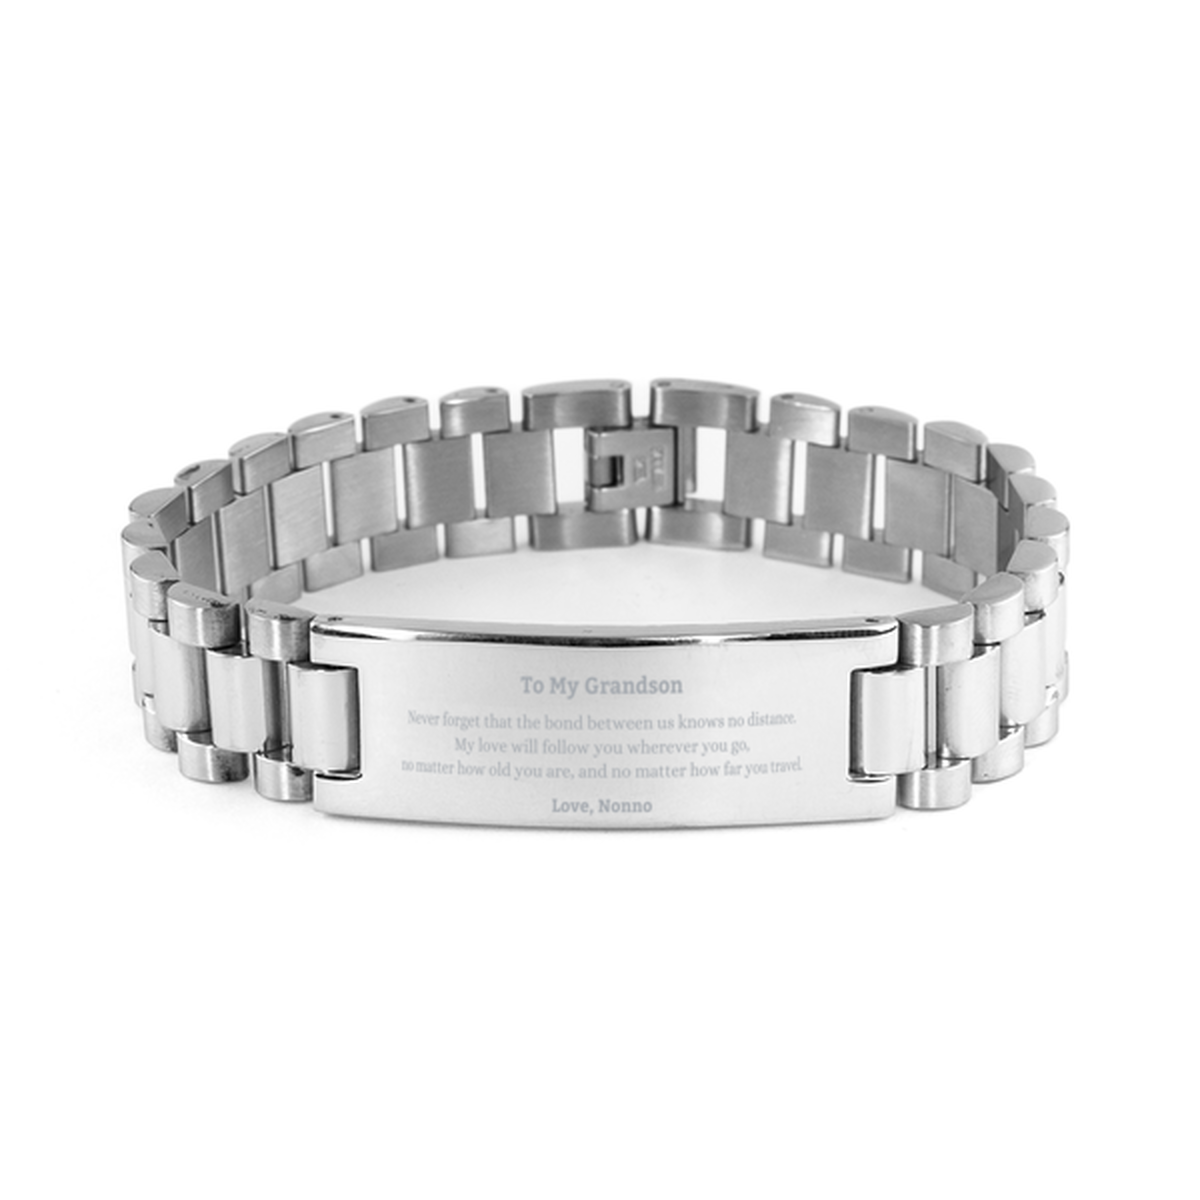 Grandson Birthday Gifts from Nonno, Adjustable Ladder Stainless Steel Bracelet for Grandson Christmas Graduation Unique Gifts Grandson Never forget that the bond between us knows no distance. Love, Nonno